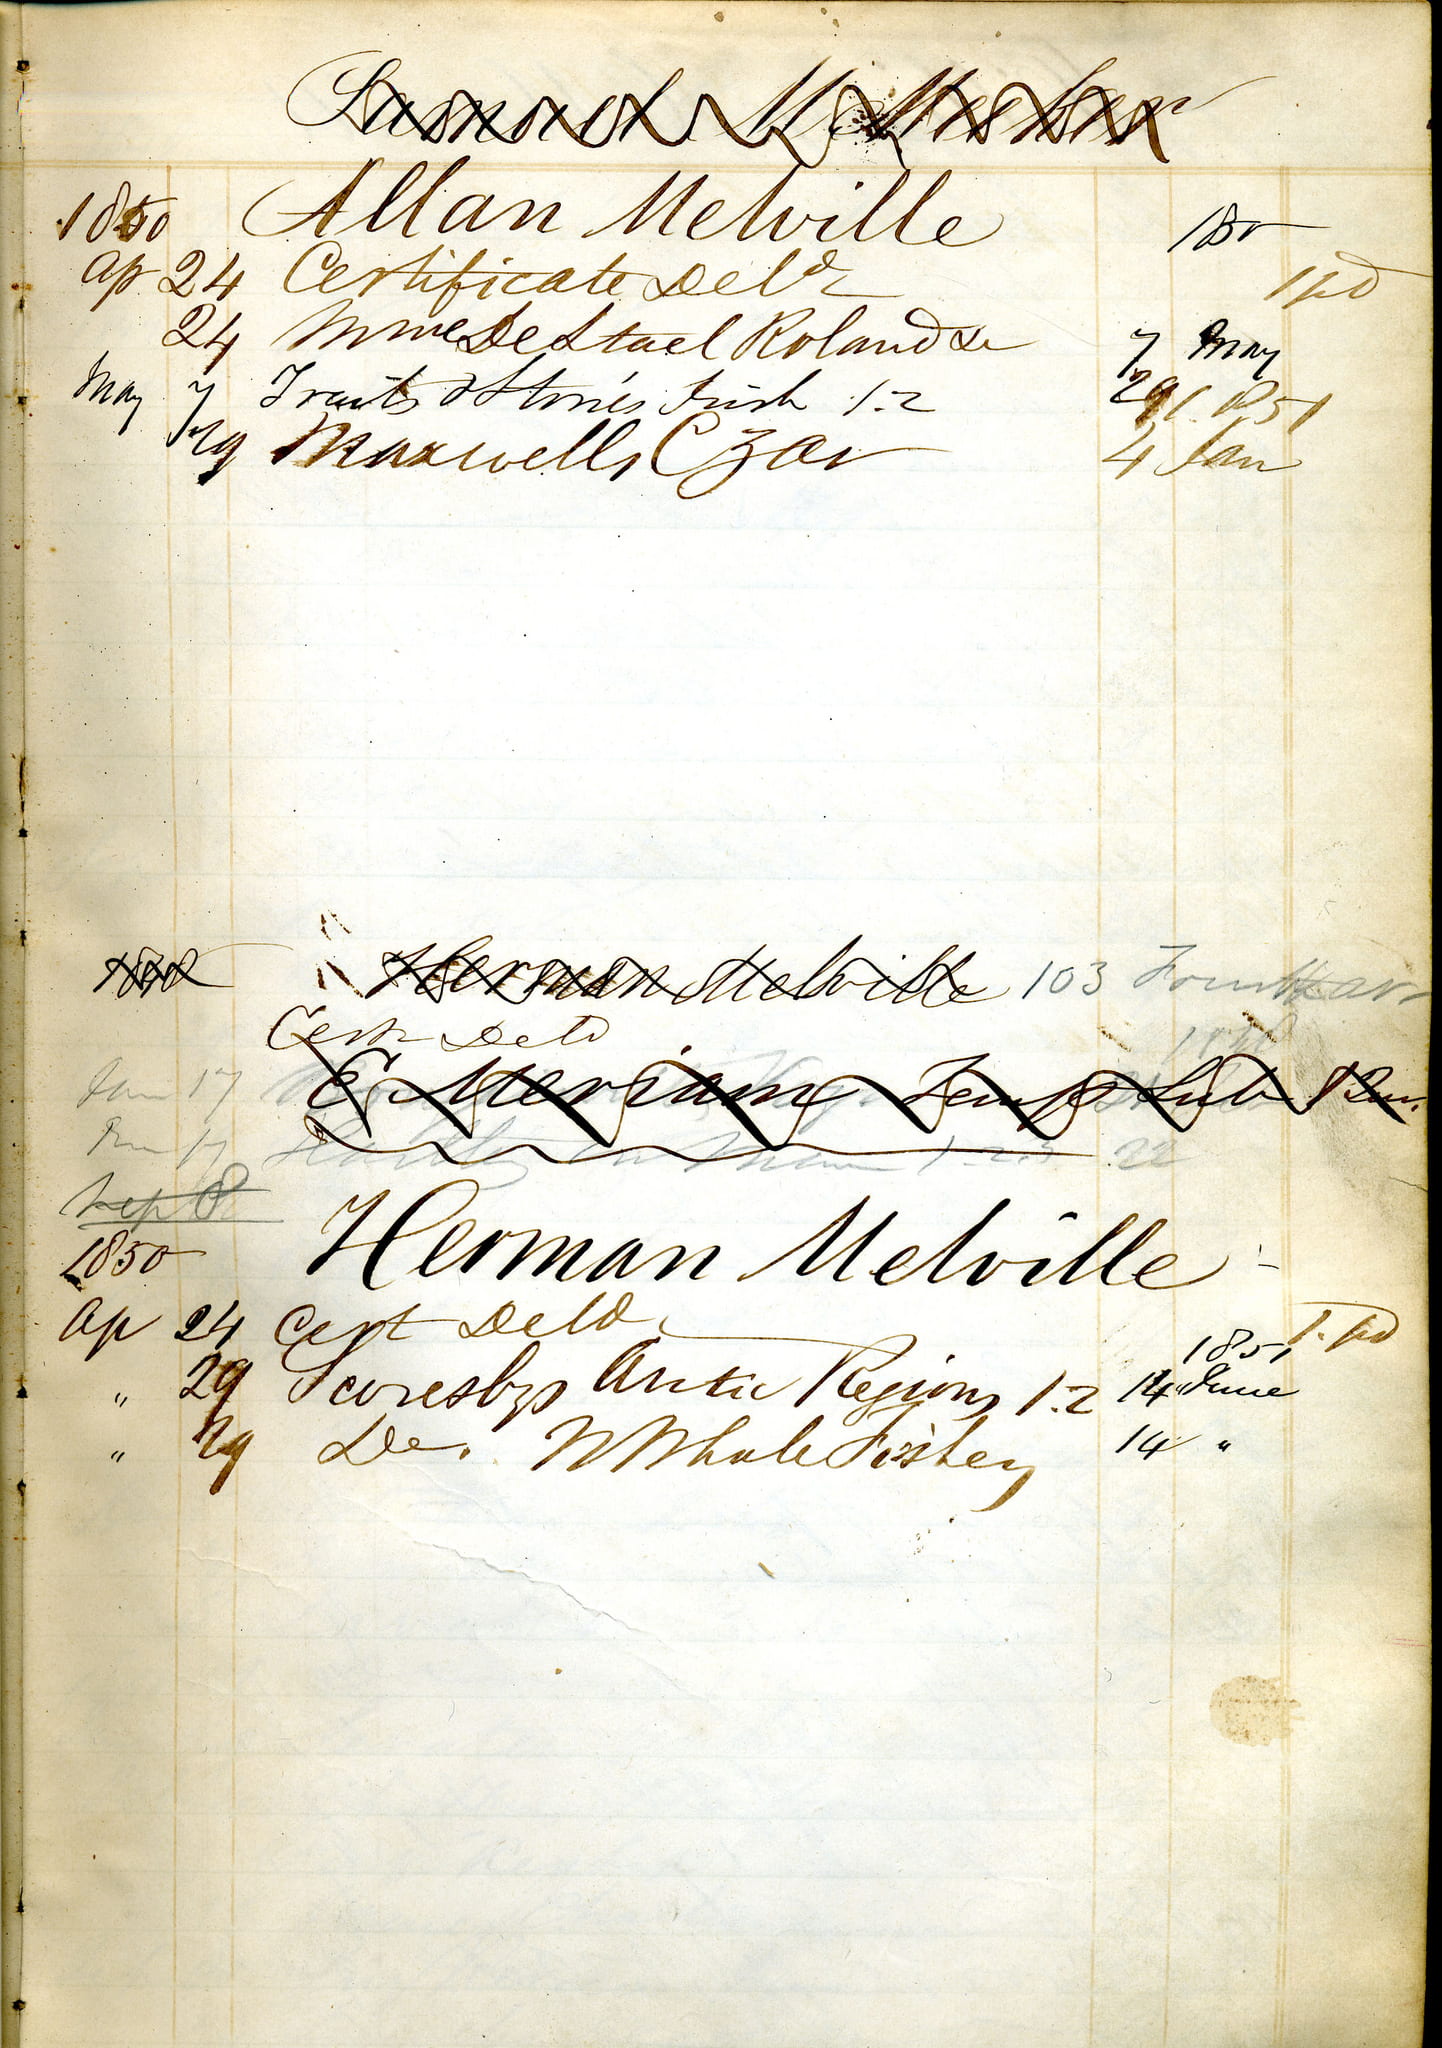 Circulation ledger featuring Melville's Society Library borrowing history, 1847-50. New York Society Library.